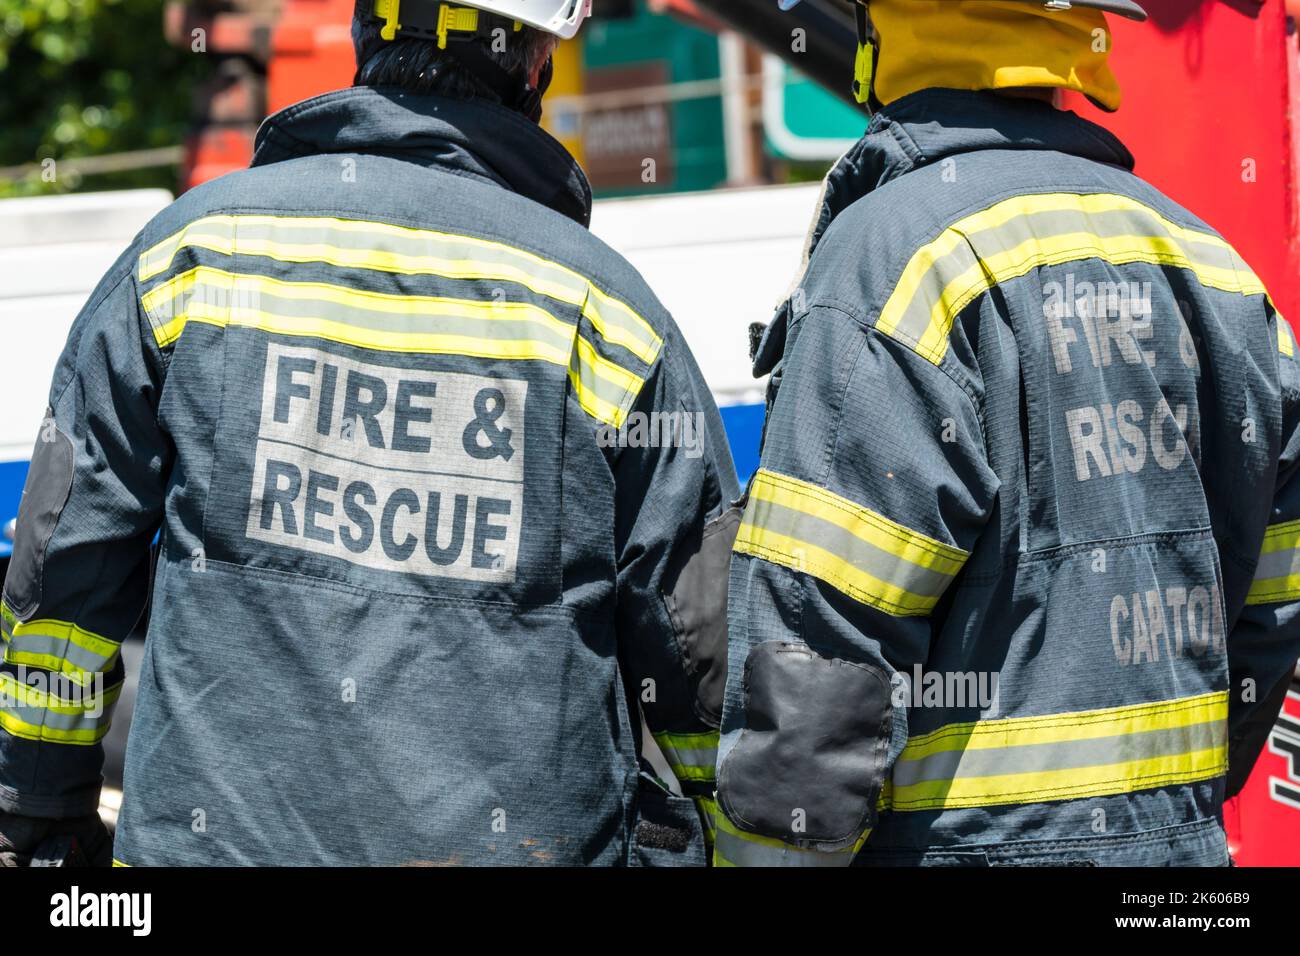 fire and rescue personnel or workers at an emergency scene wearing full uniform in South Africa Stock Photo